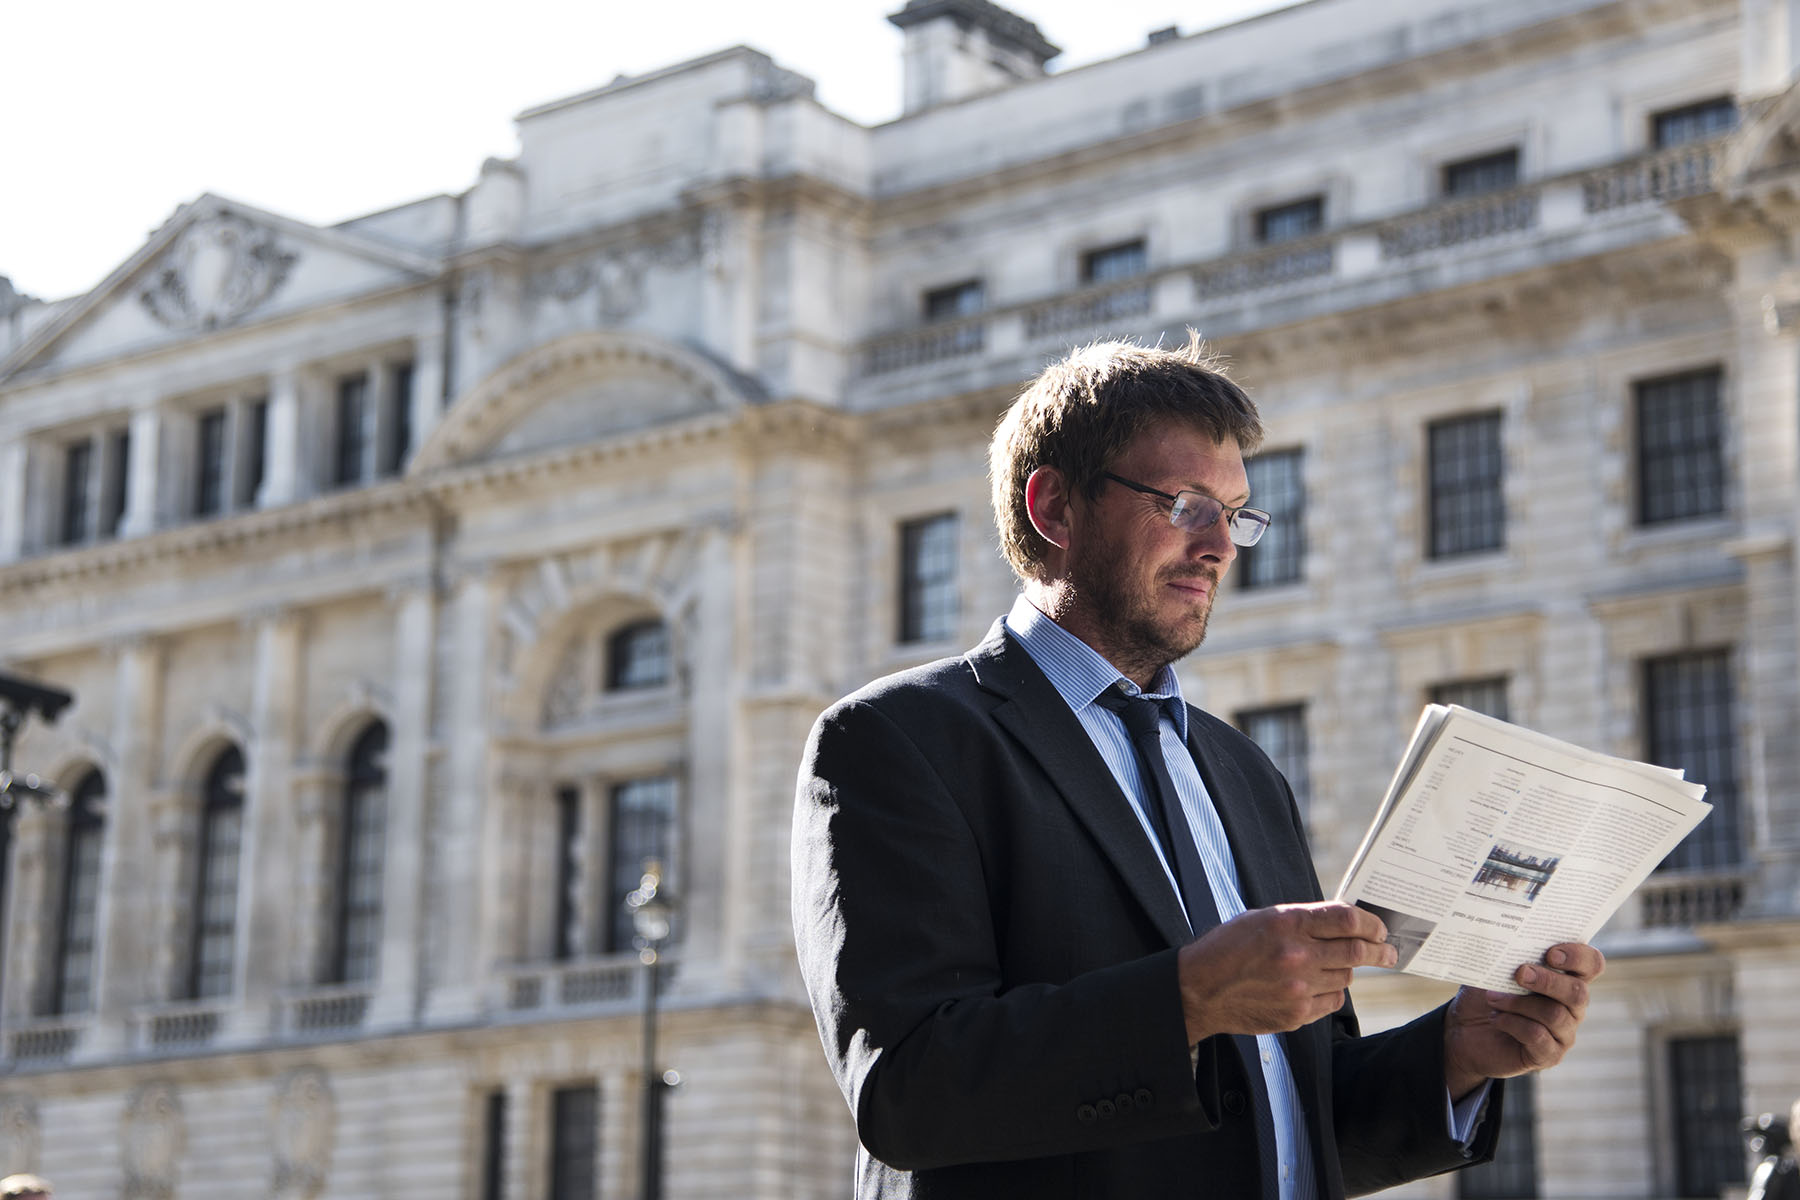 Man with glasses reading a newspaper outside a large stately-looking building.